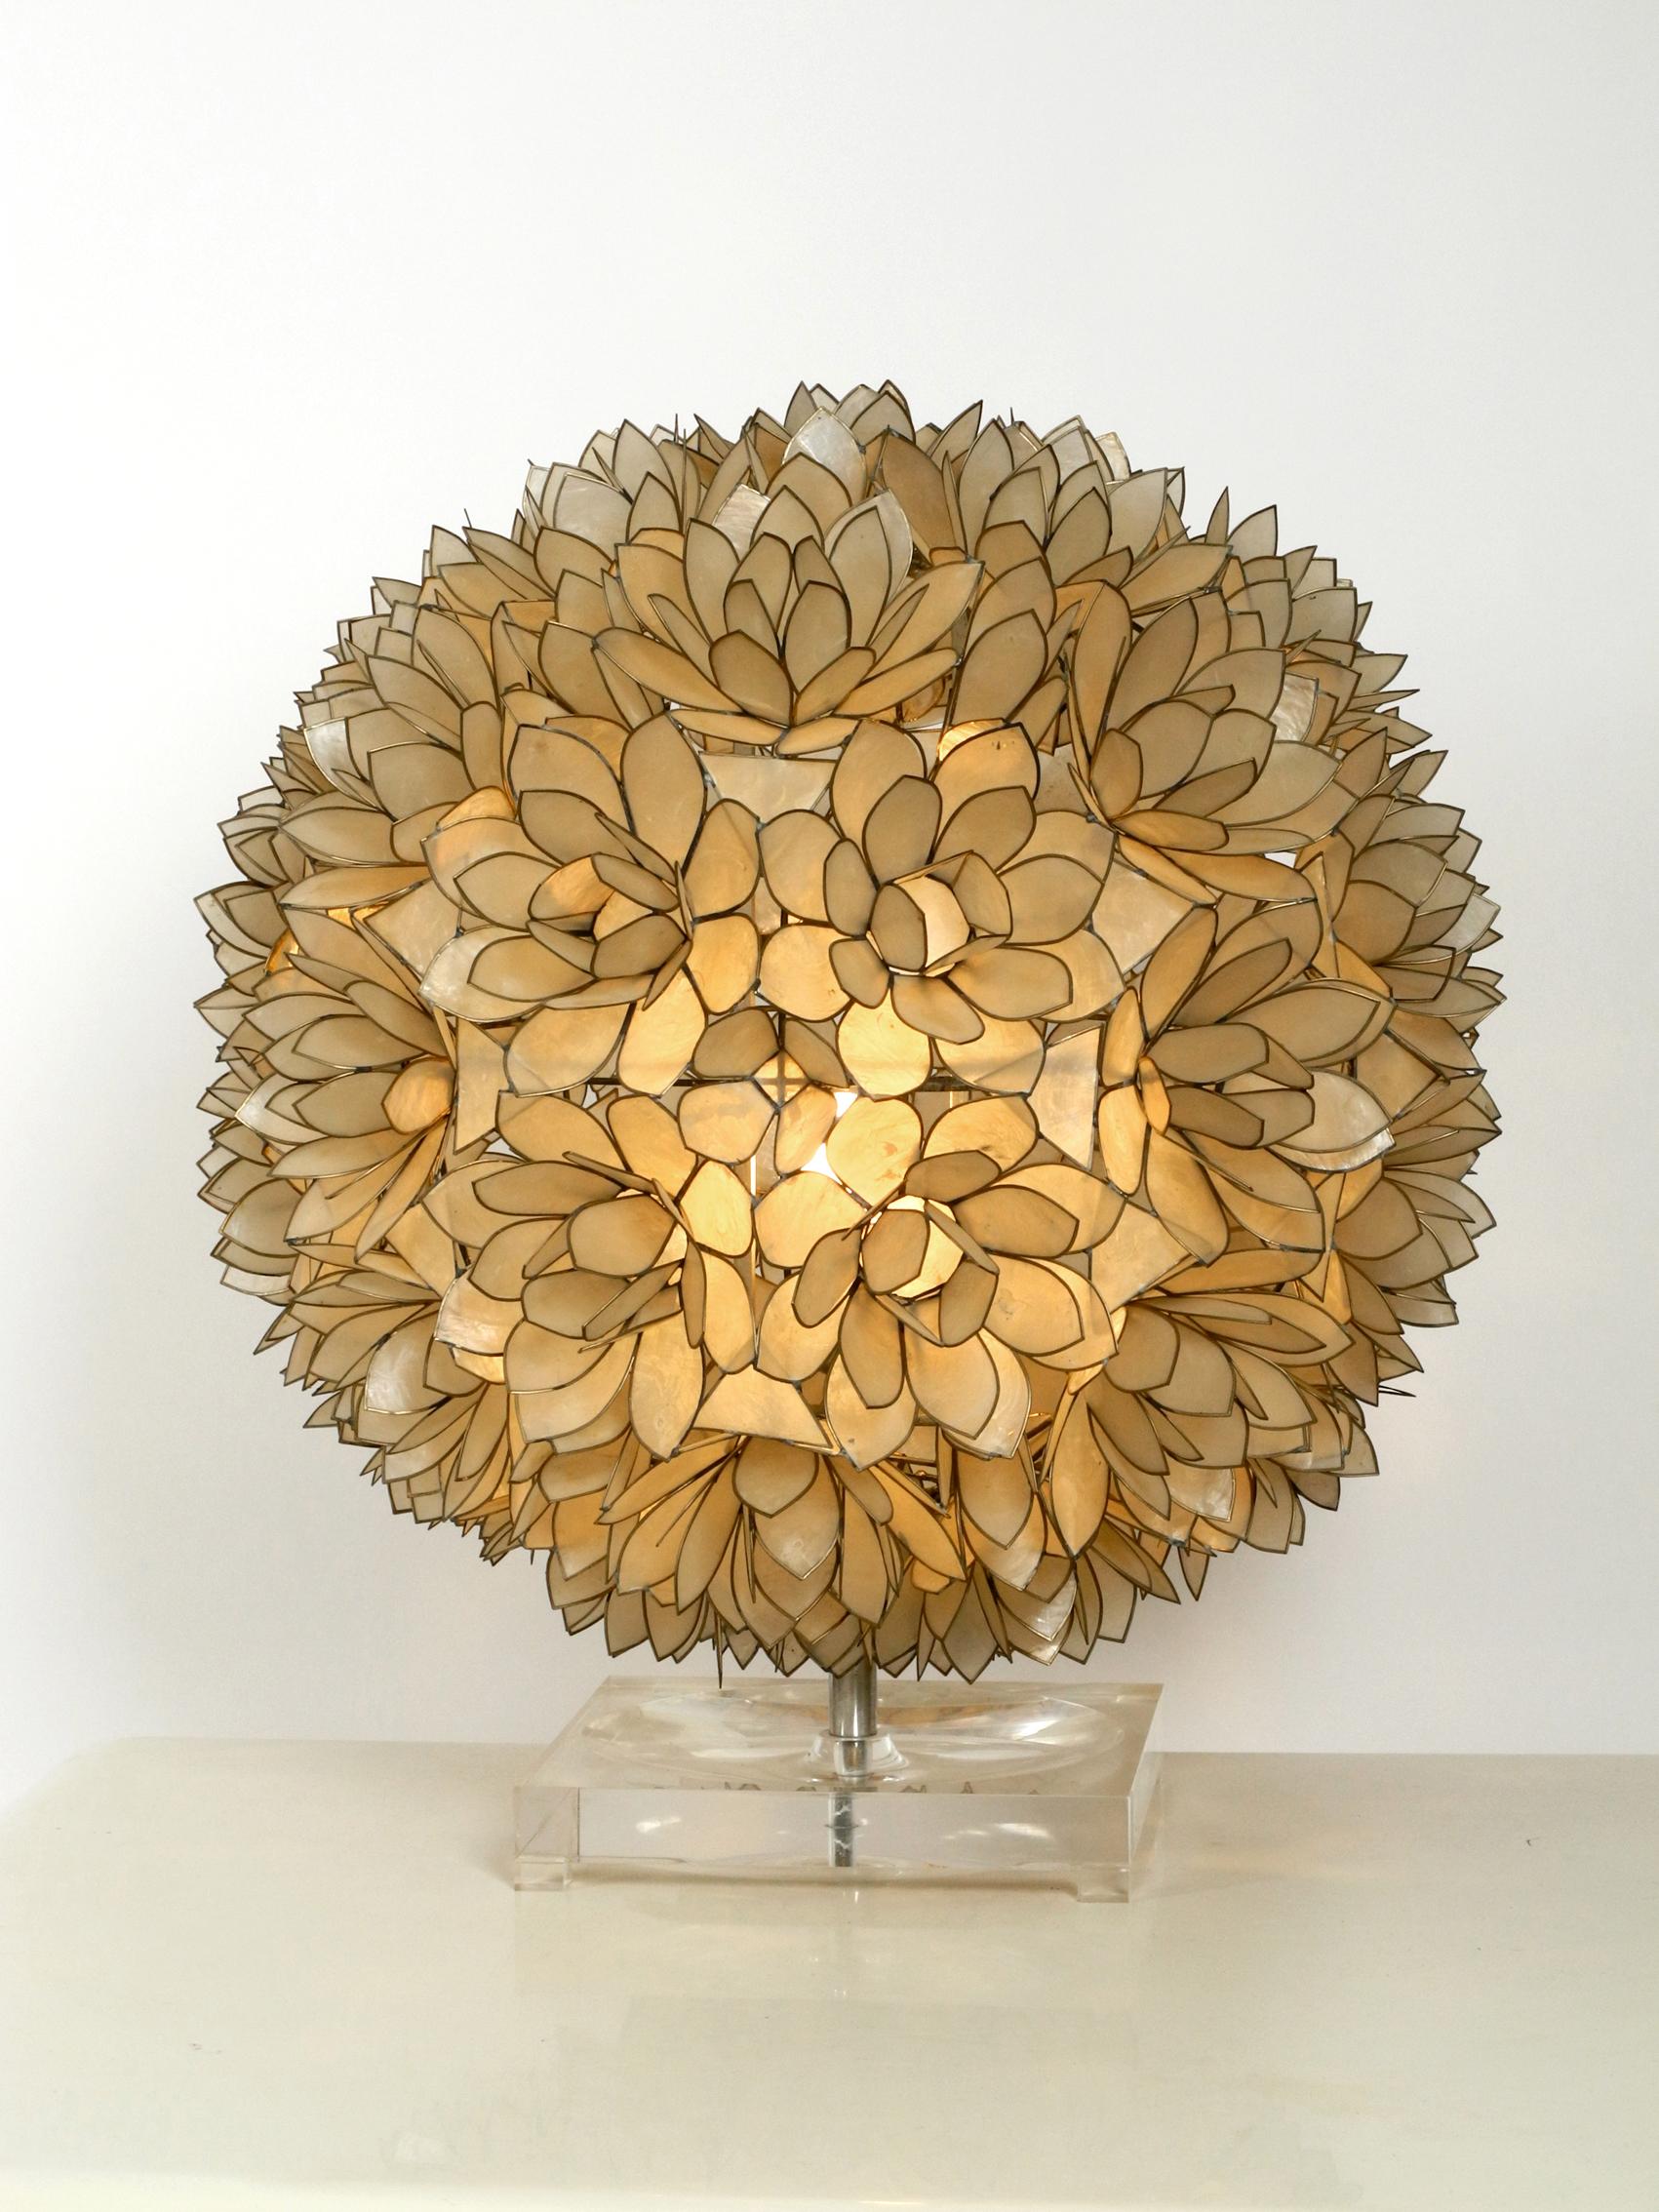 Very elegant huge beautiful flower table lamp in spherical shape consisting of blossoms made of mother of pearl. Manufacturer is Rausch Beleuchtung, Made in Germany. Great rare design of the 1970s. Very high quality workmanship. Metal frame is solid